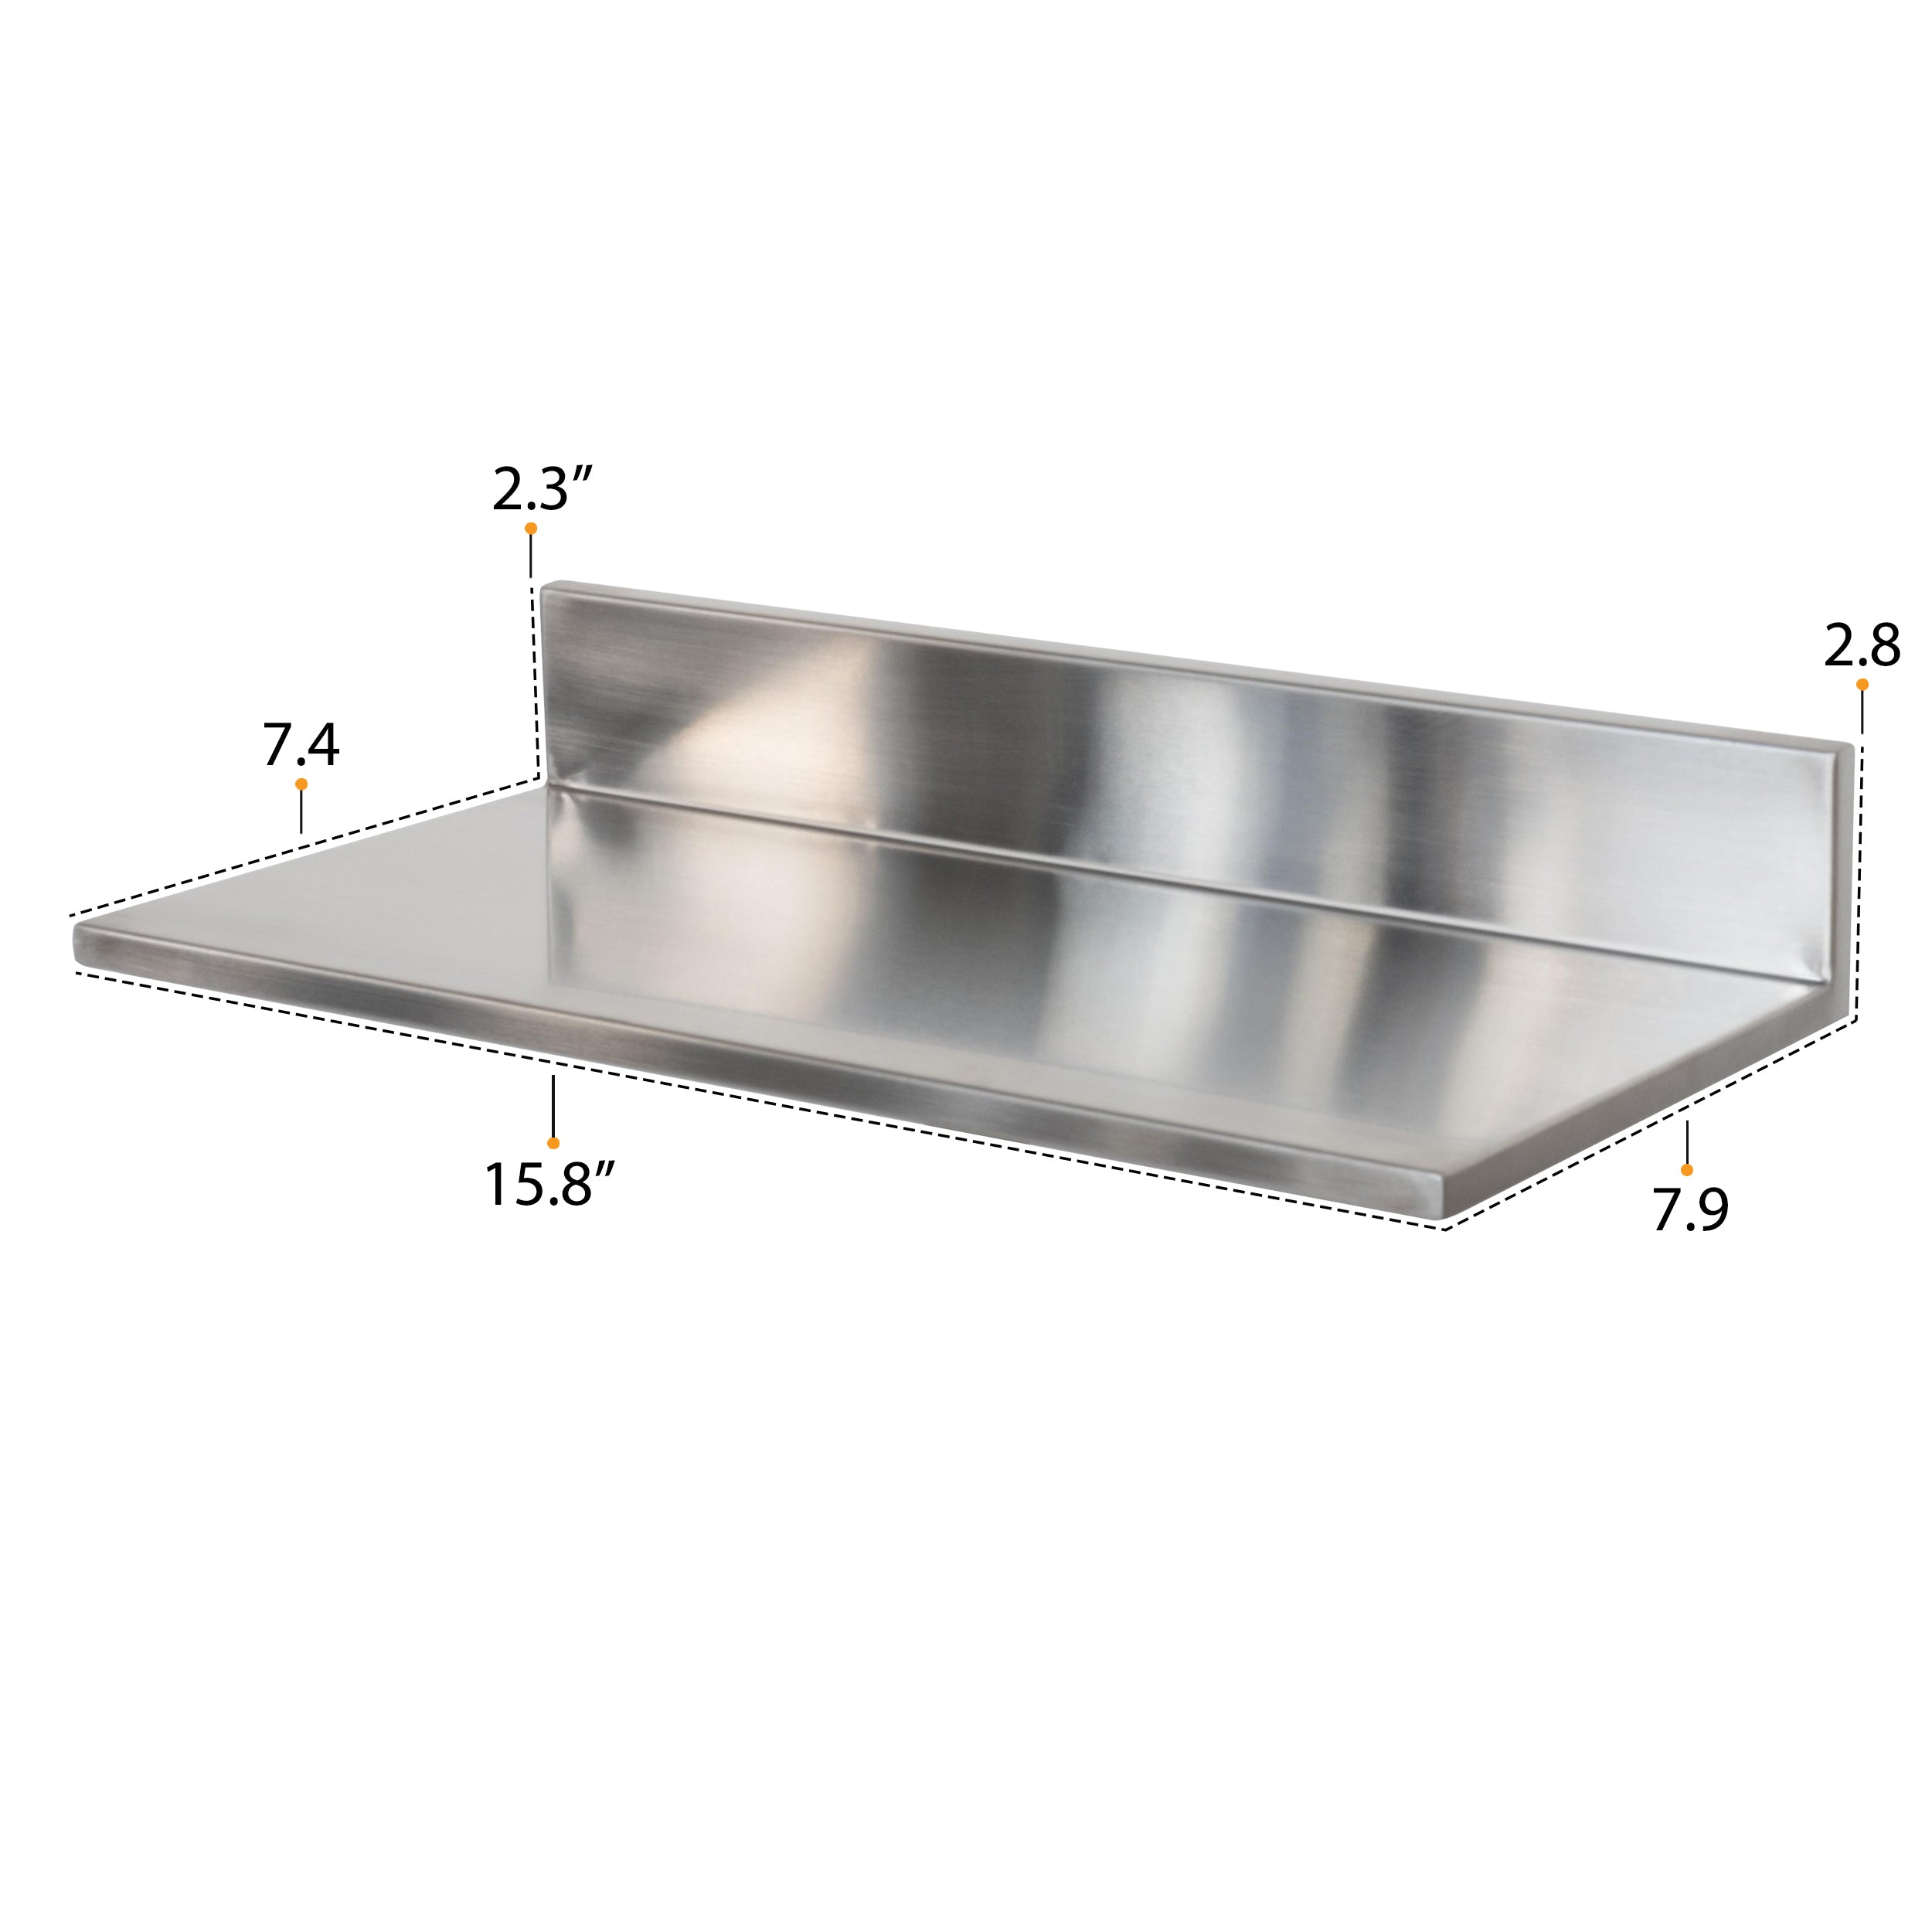 PLAT Stainless Steel Floating Shelves for Wall, 15.8" Metal Wall Shelves for Restaurant, Bar, Cafe, Kitchen Organization and Storage - Set of 3 - Silver - Wallniture